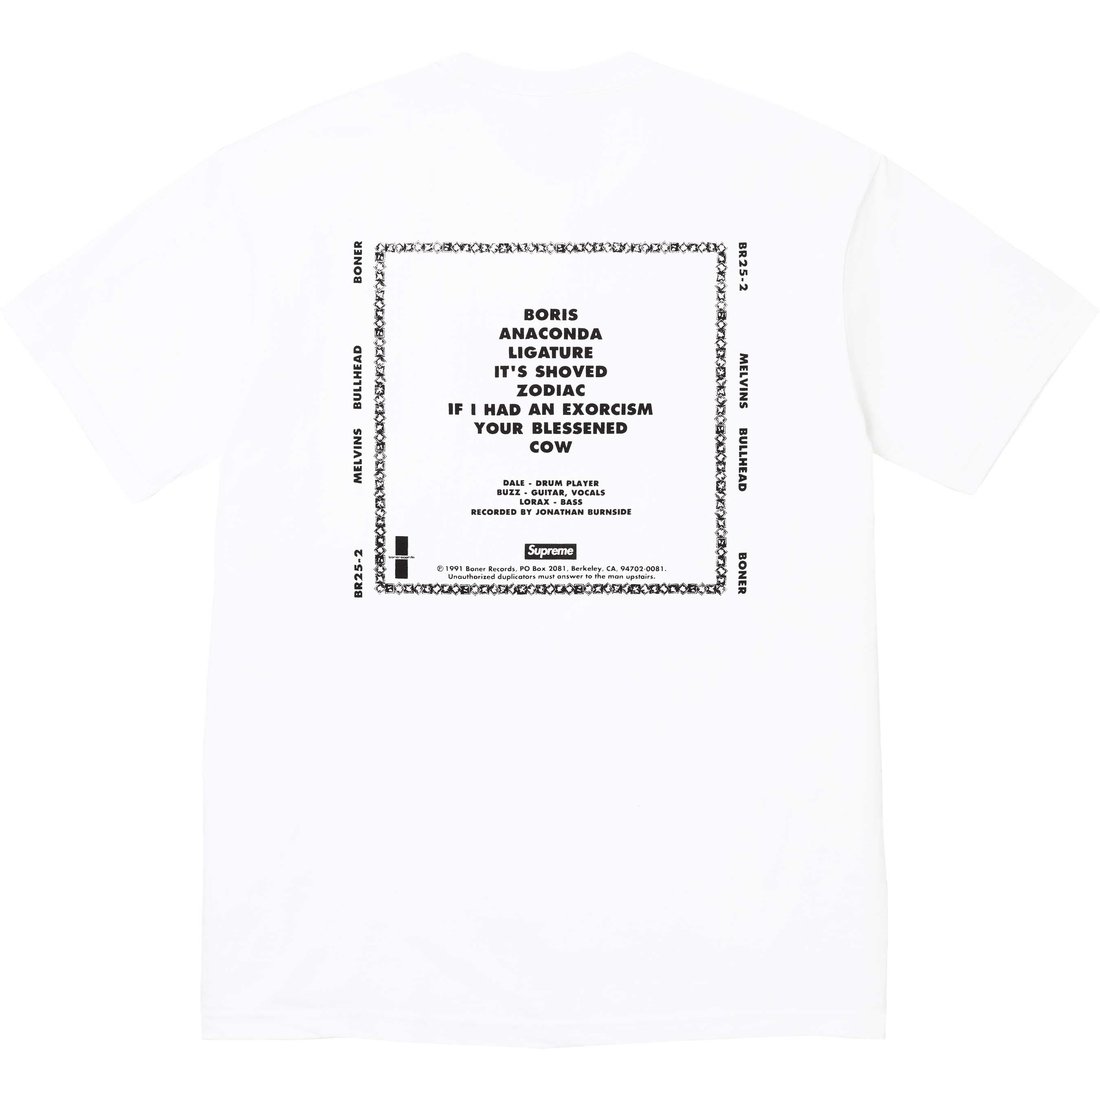 Details on Melvins Bullhead Tee White from spring summer
                                                    2024 (Price is $48)